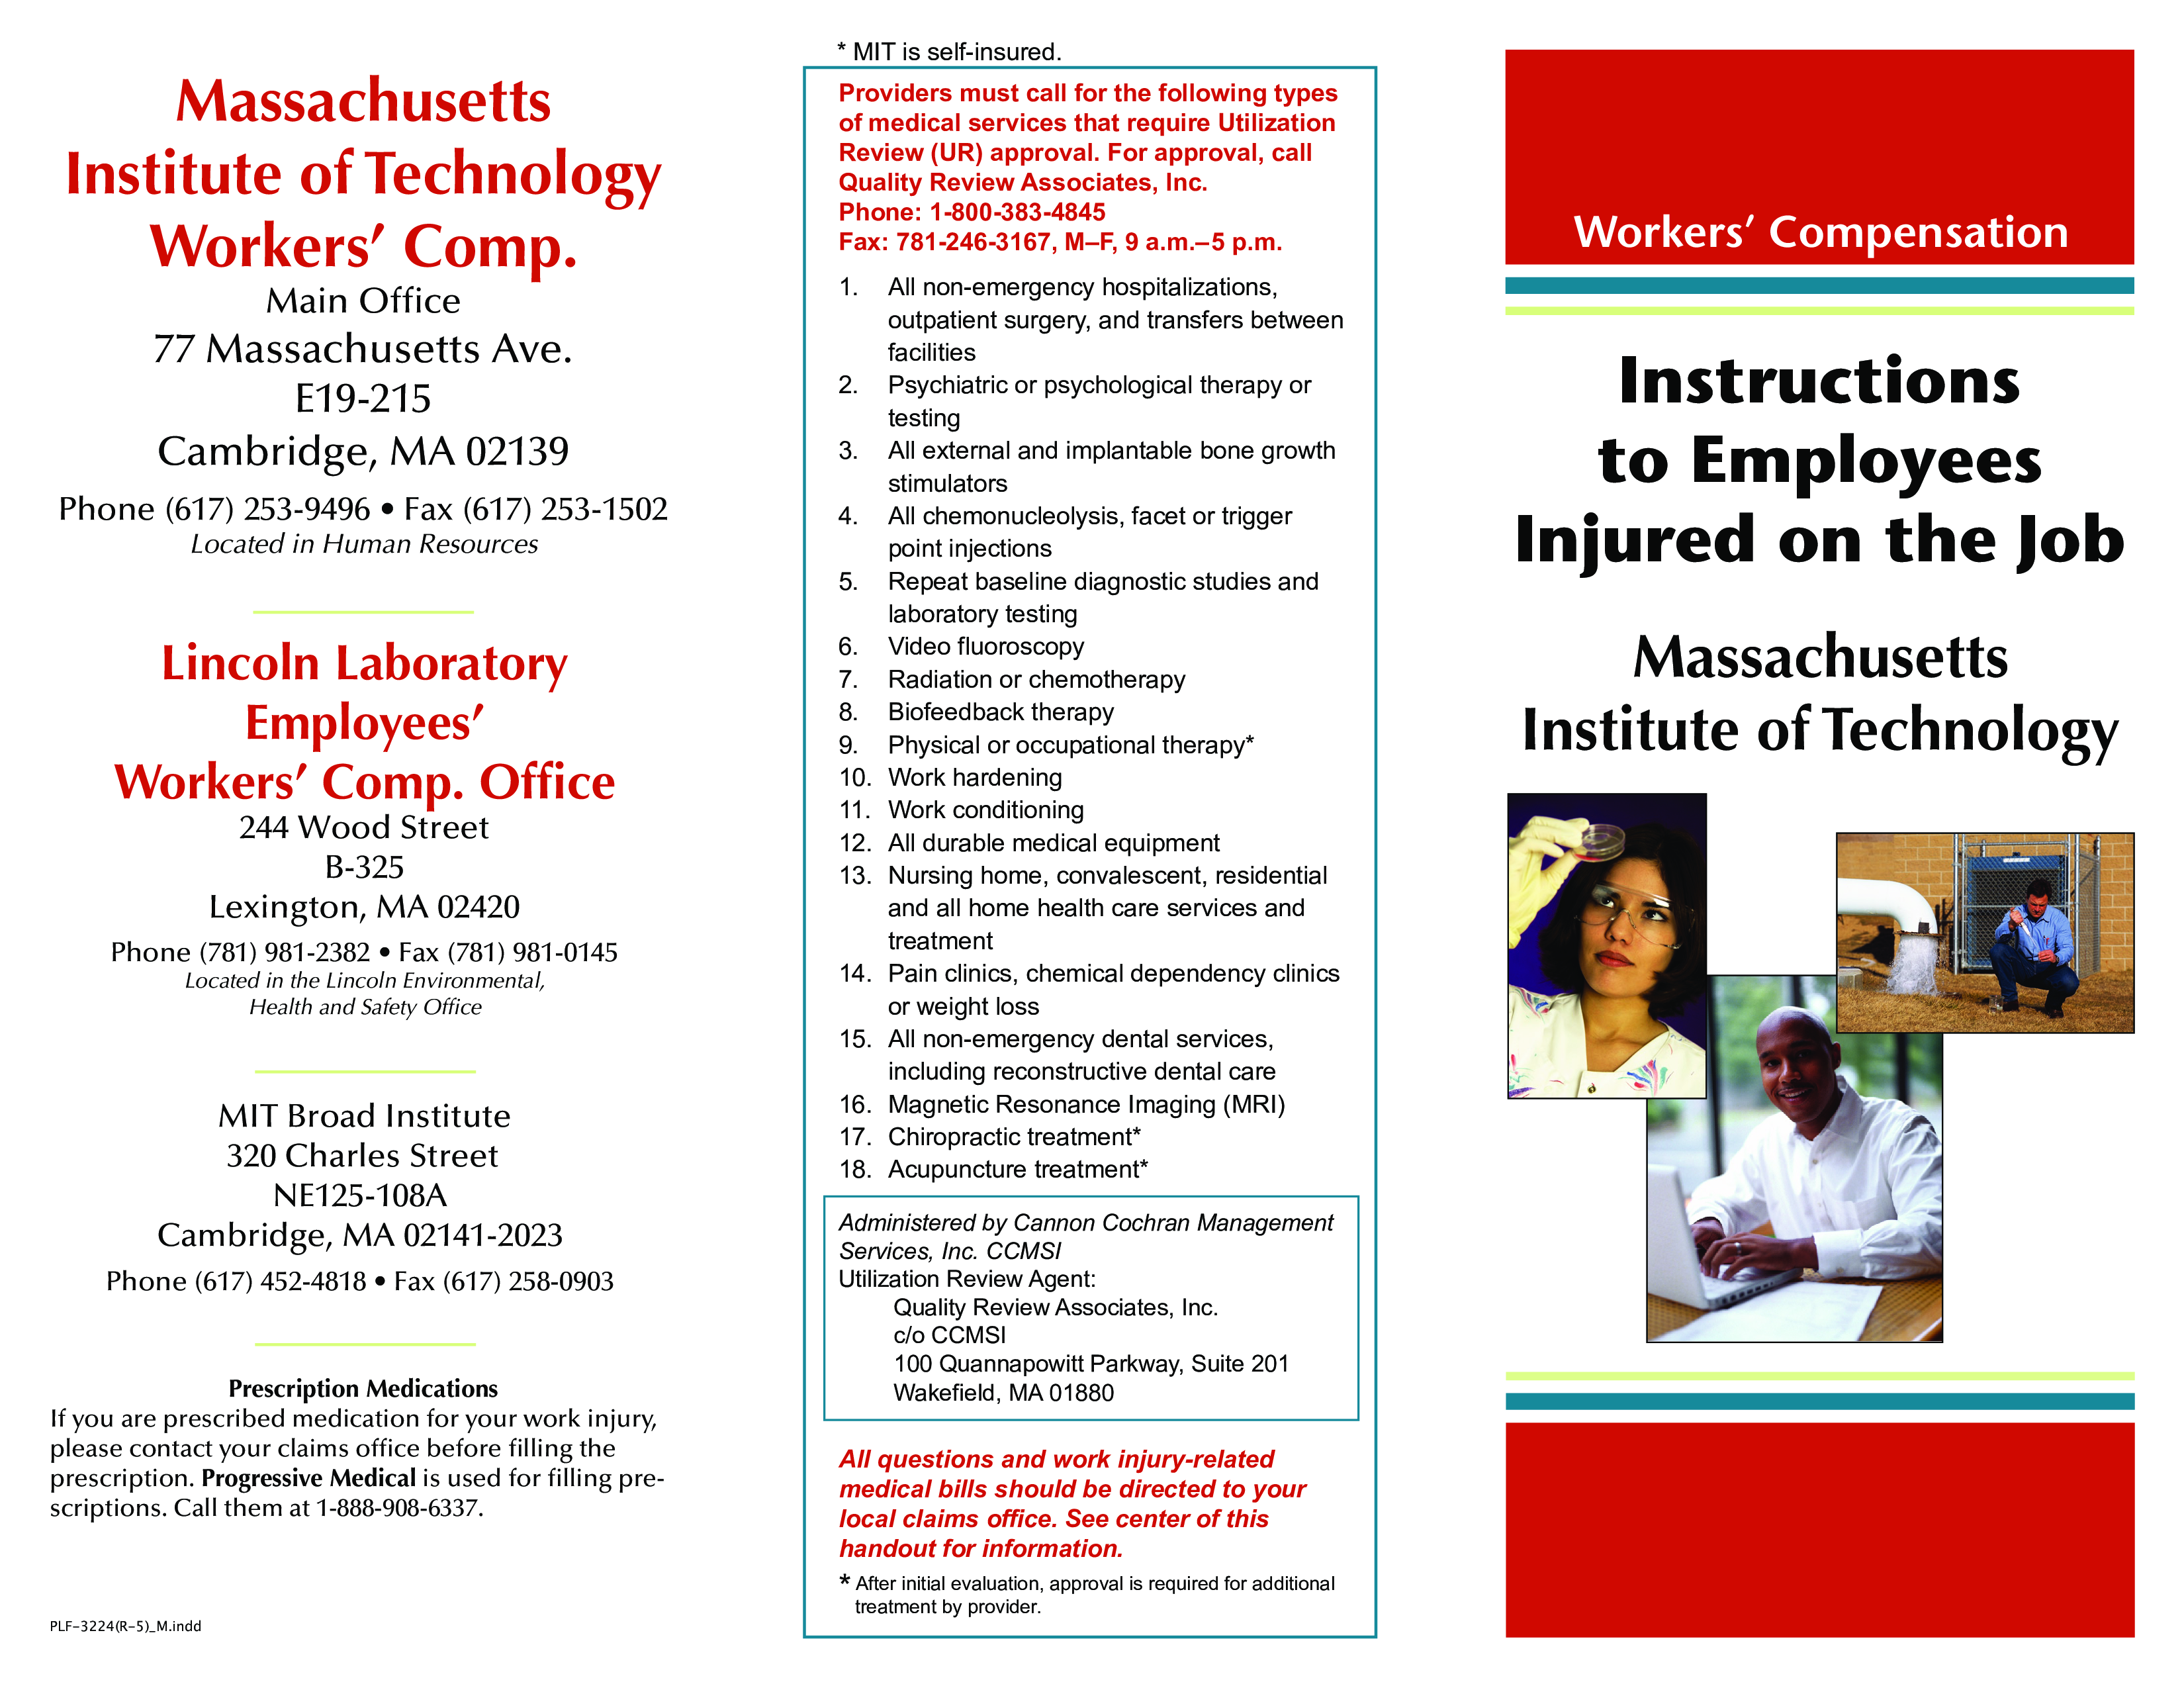 employees injured on job instructions template